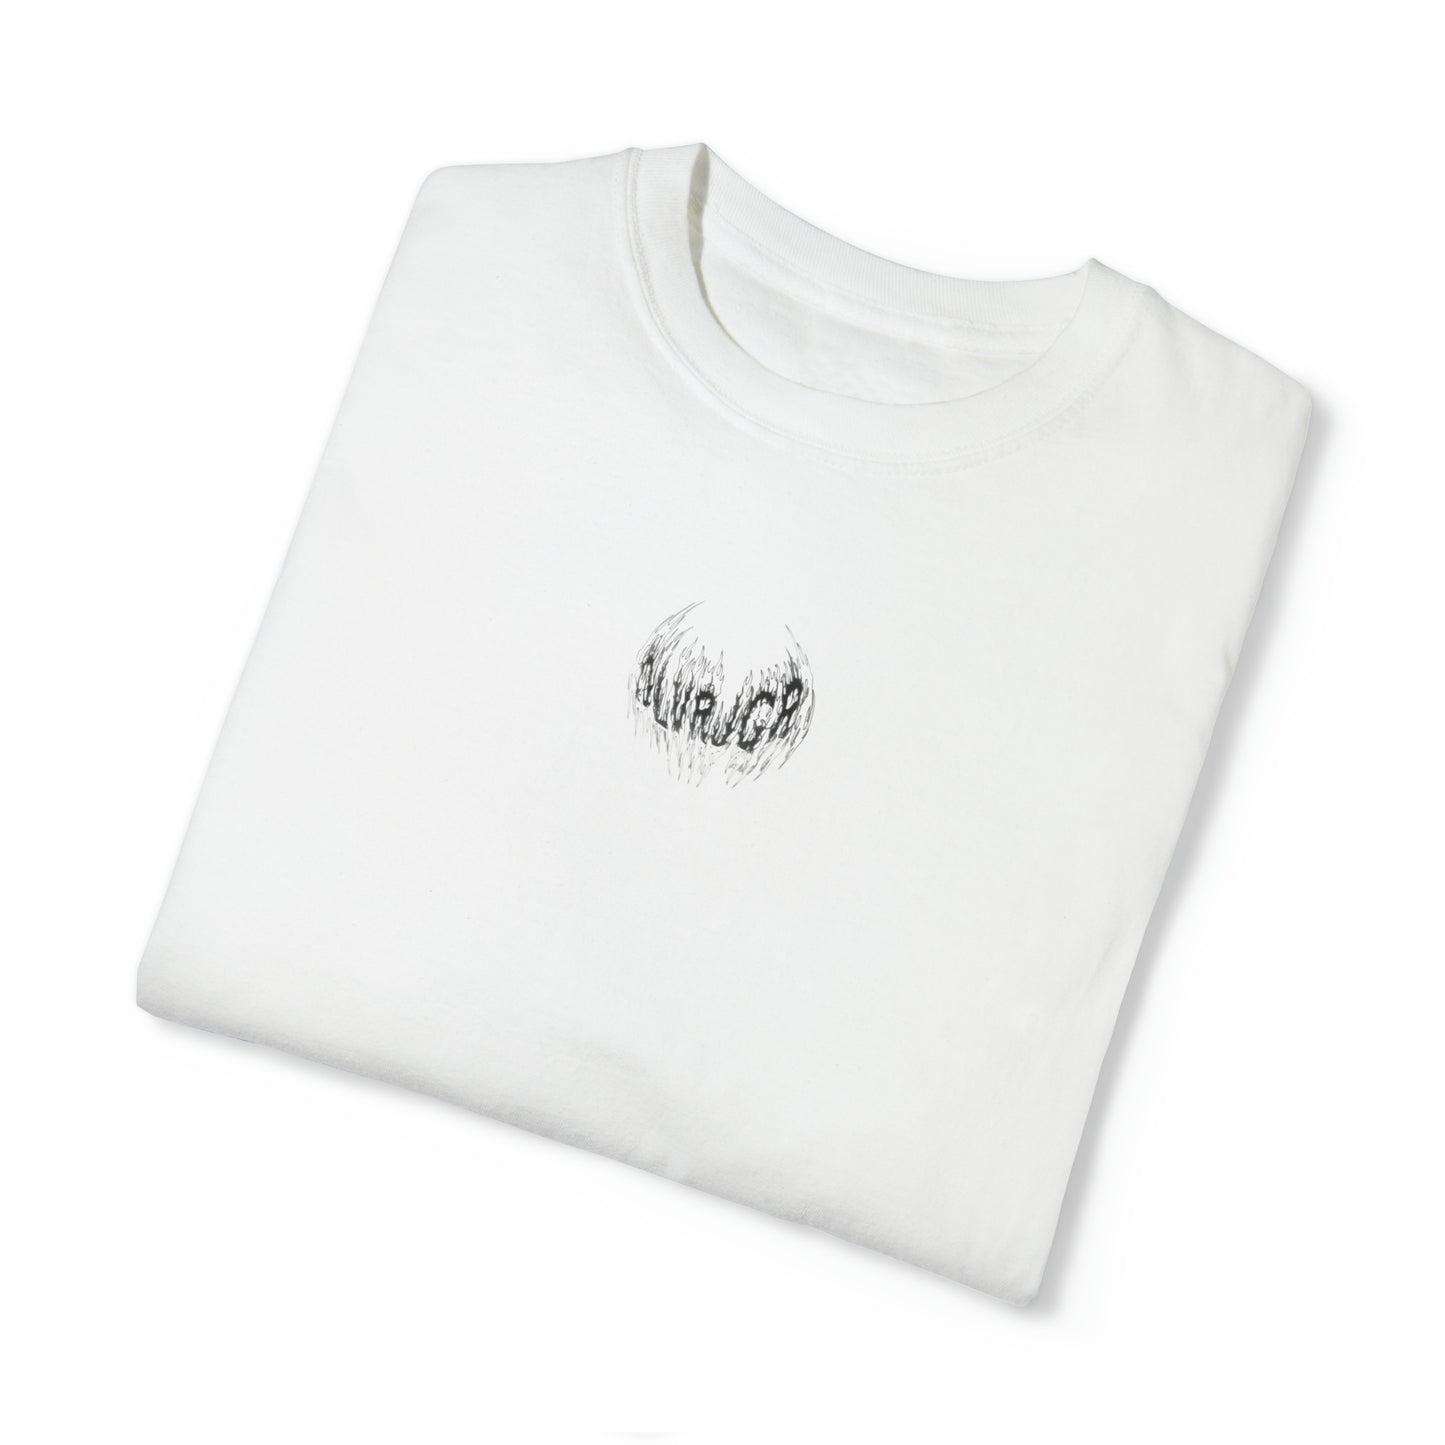 "CATHEDRAL" s/s tee